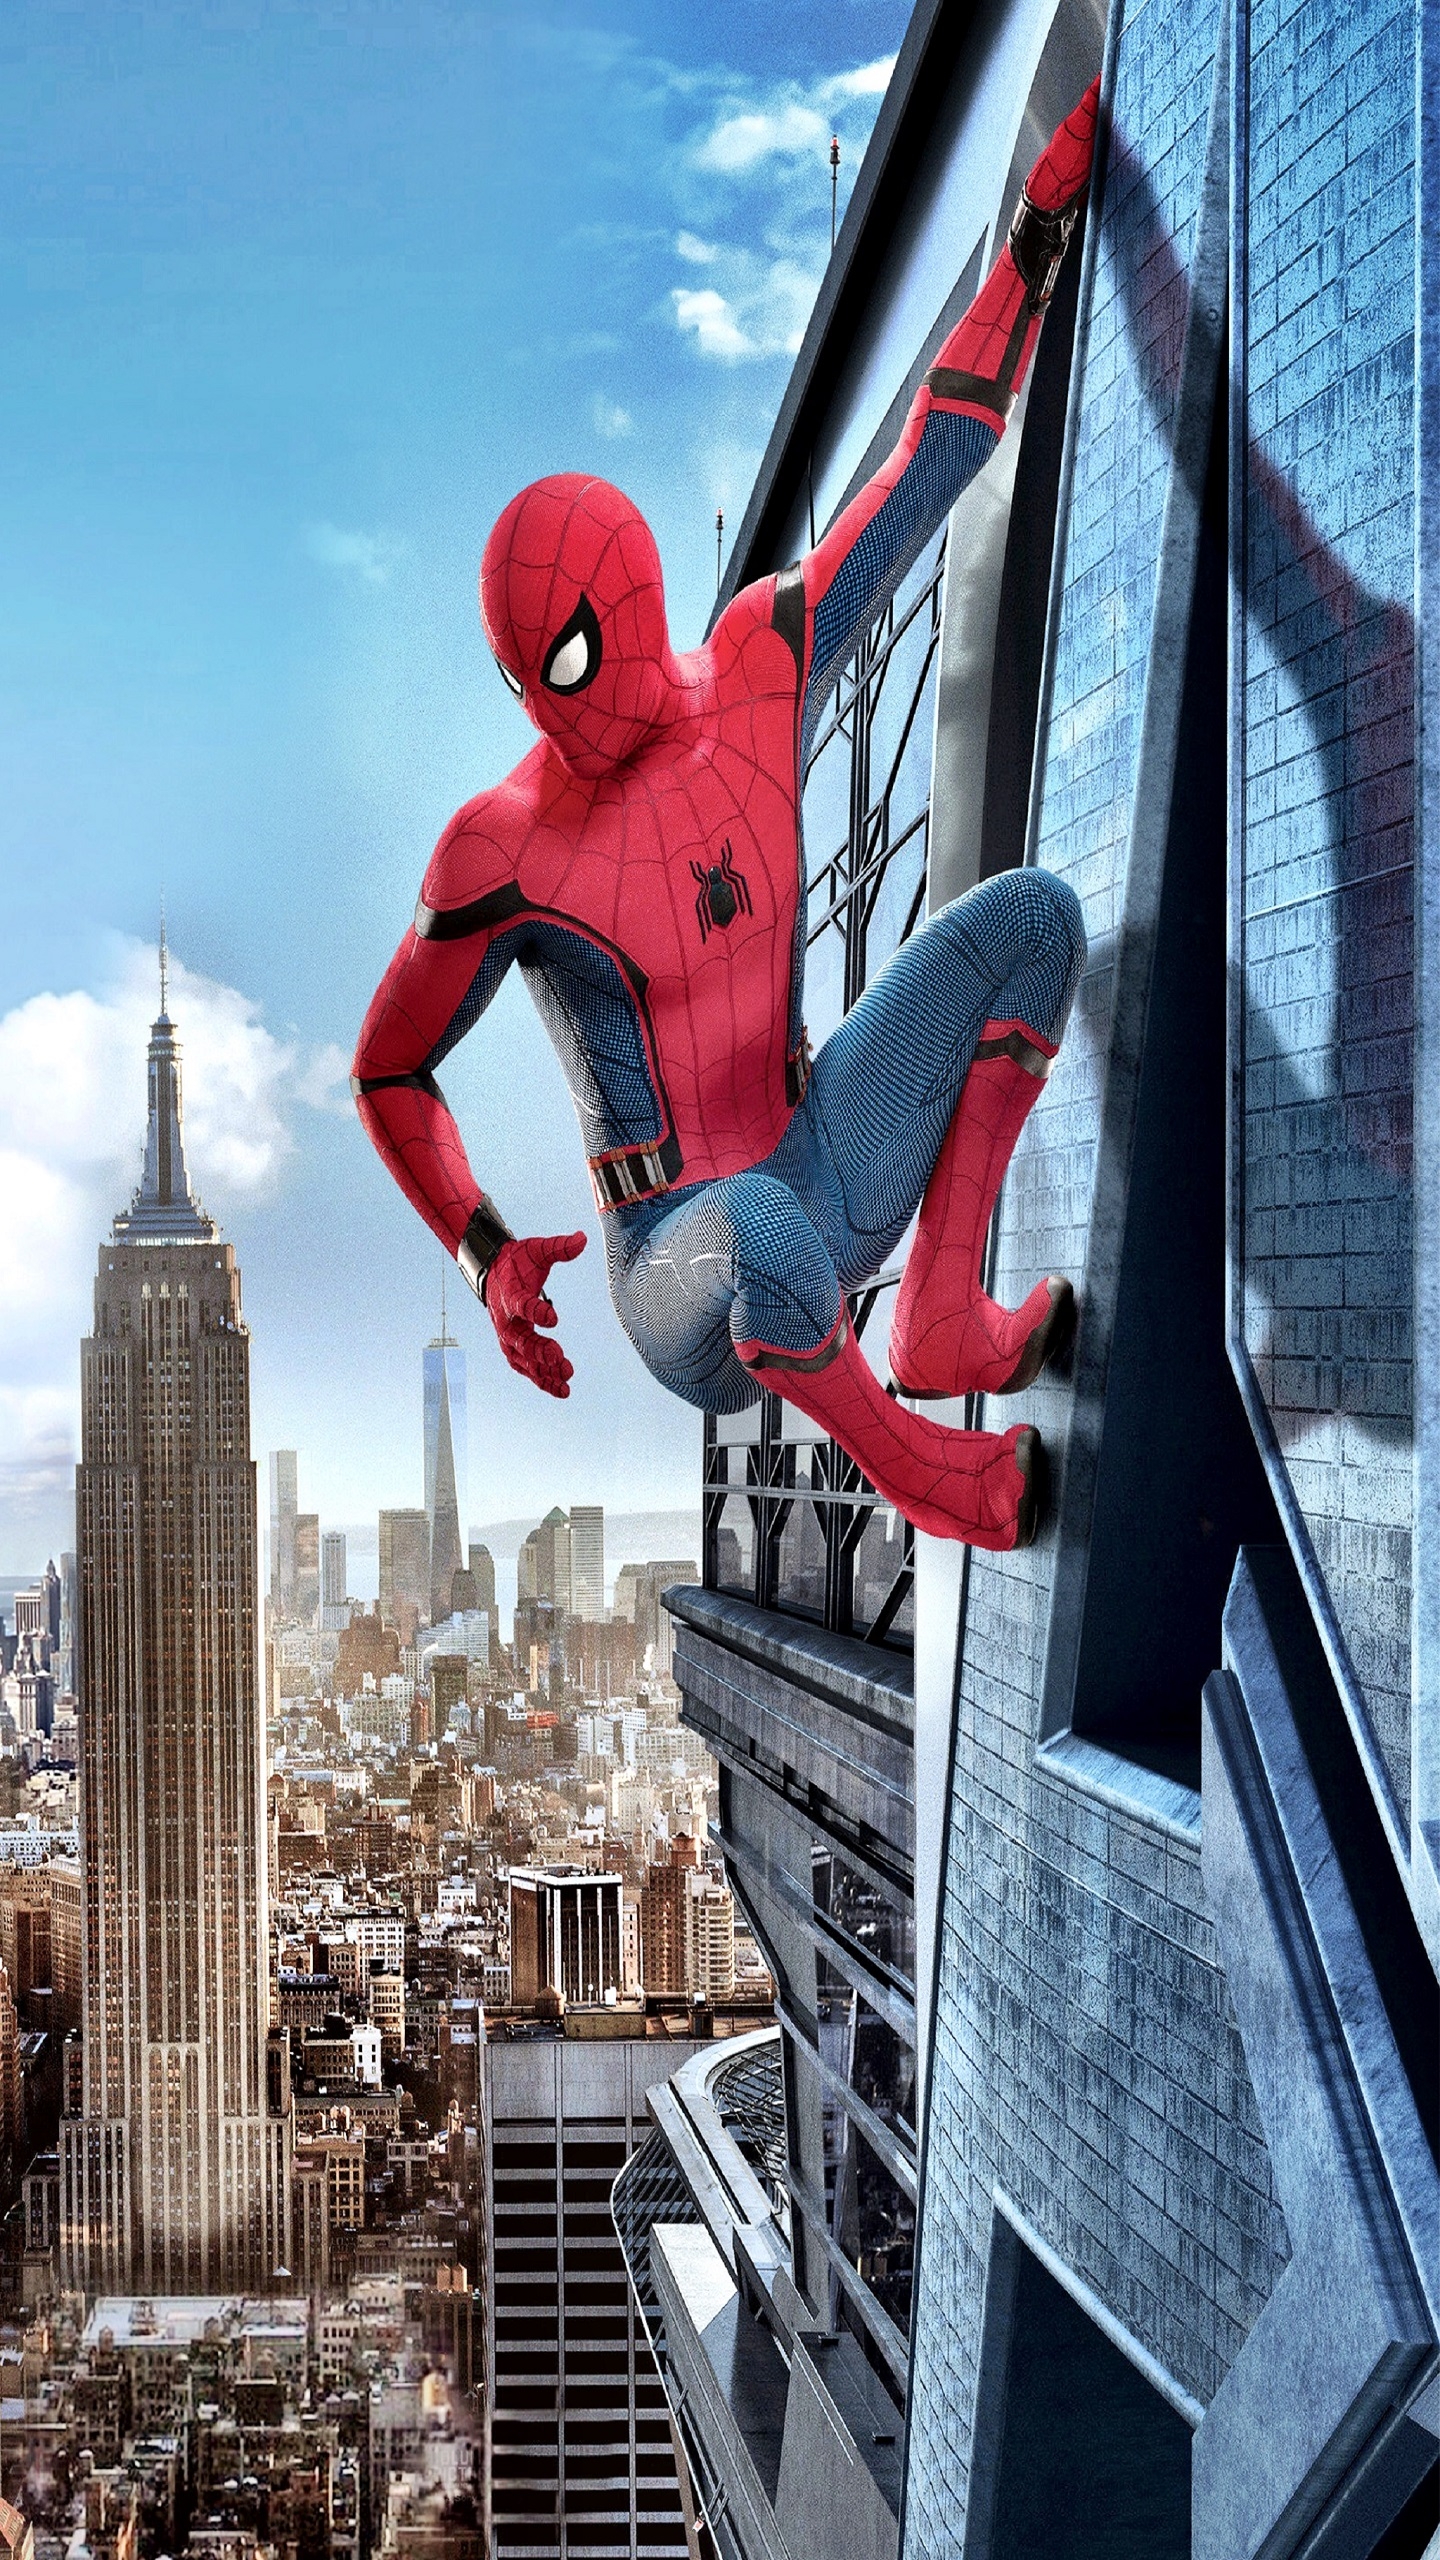 Spiderman Homecoming for Samsung S7 & S7 Edge resolution